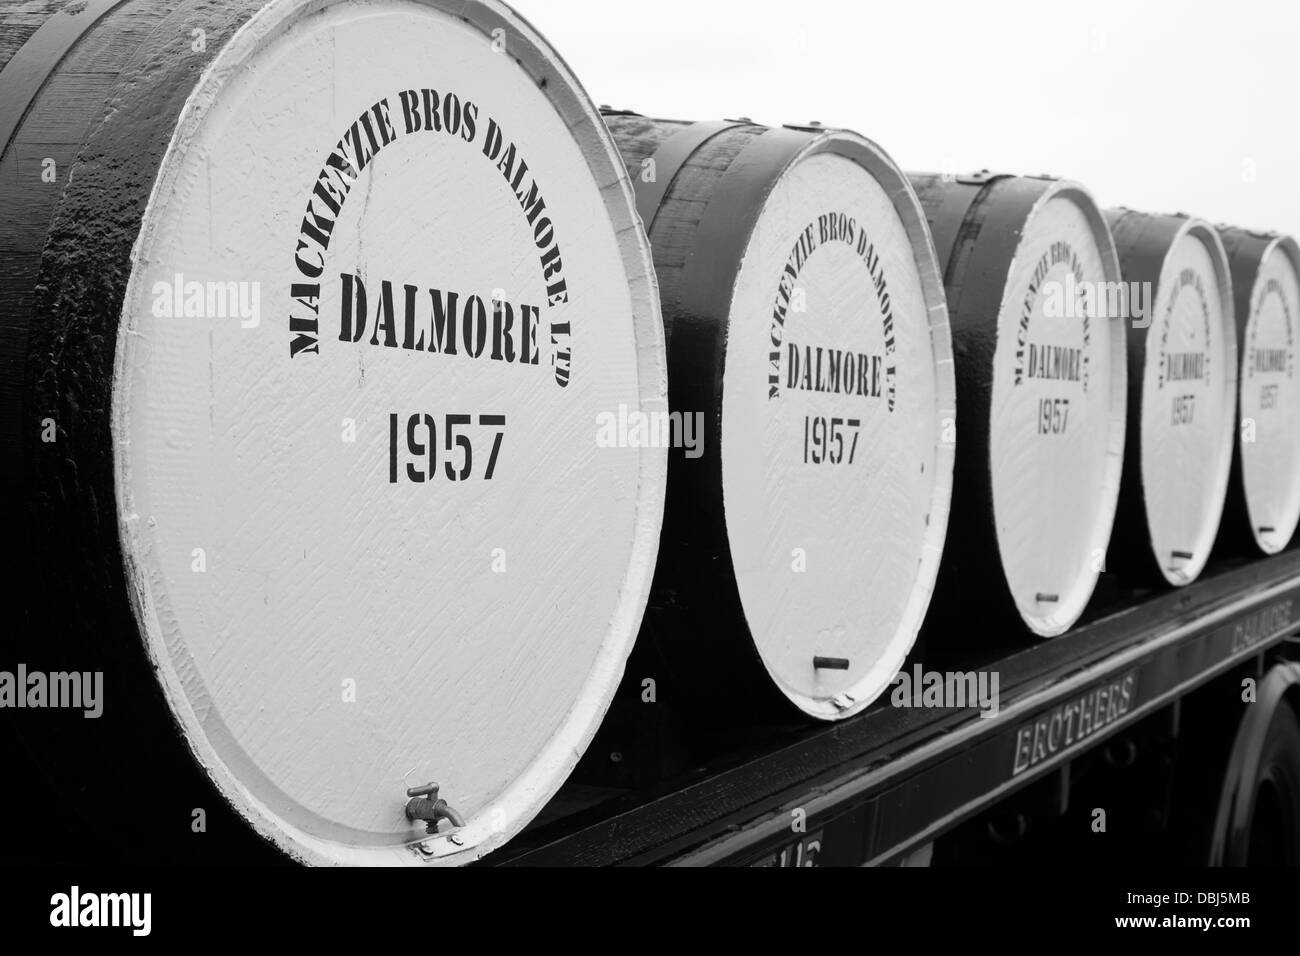 Large 1957 Scottish whisky casks or barrels on a flatbed lorry at Dalmore. MacKenzie Bros Dalmore Ltd. a distillery in Alness, Scotland, UK Stock Photo